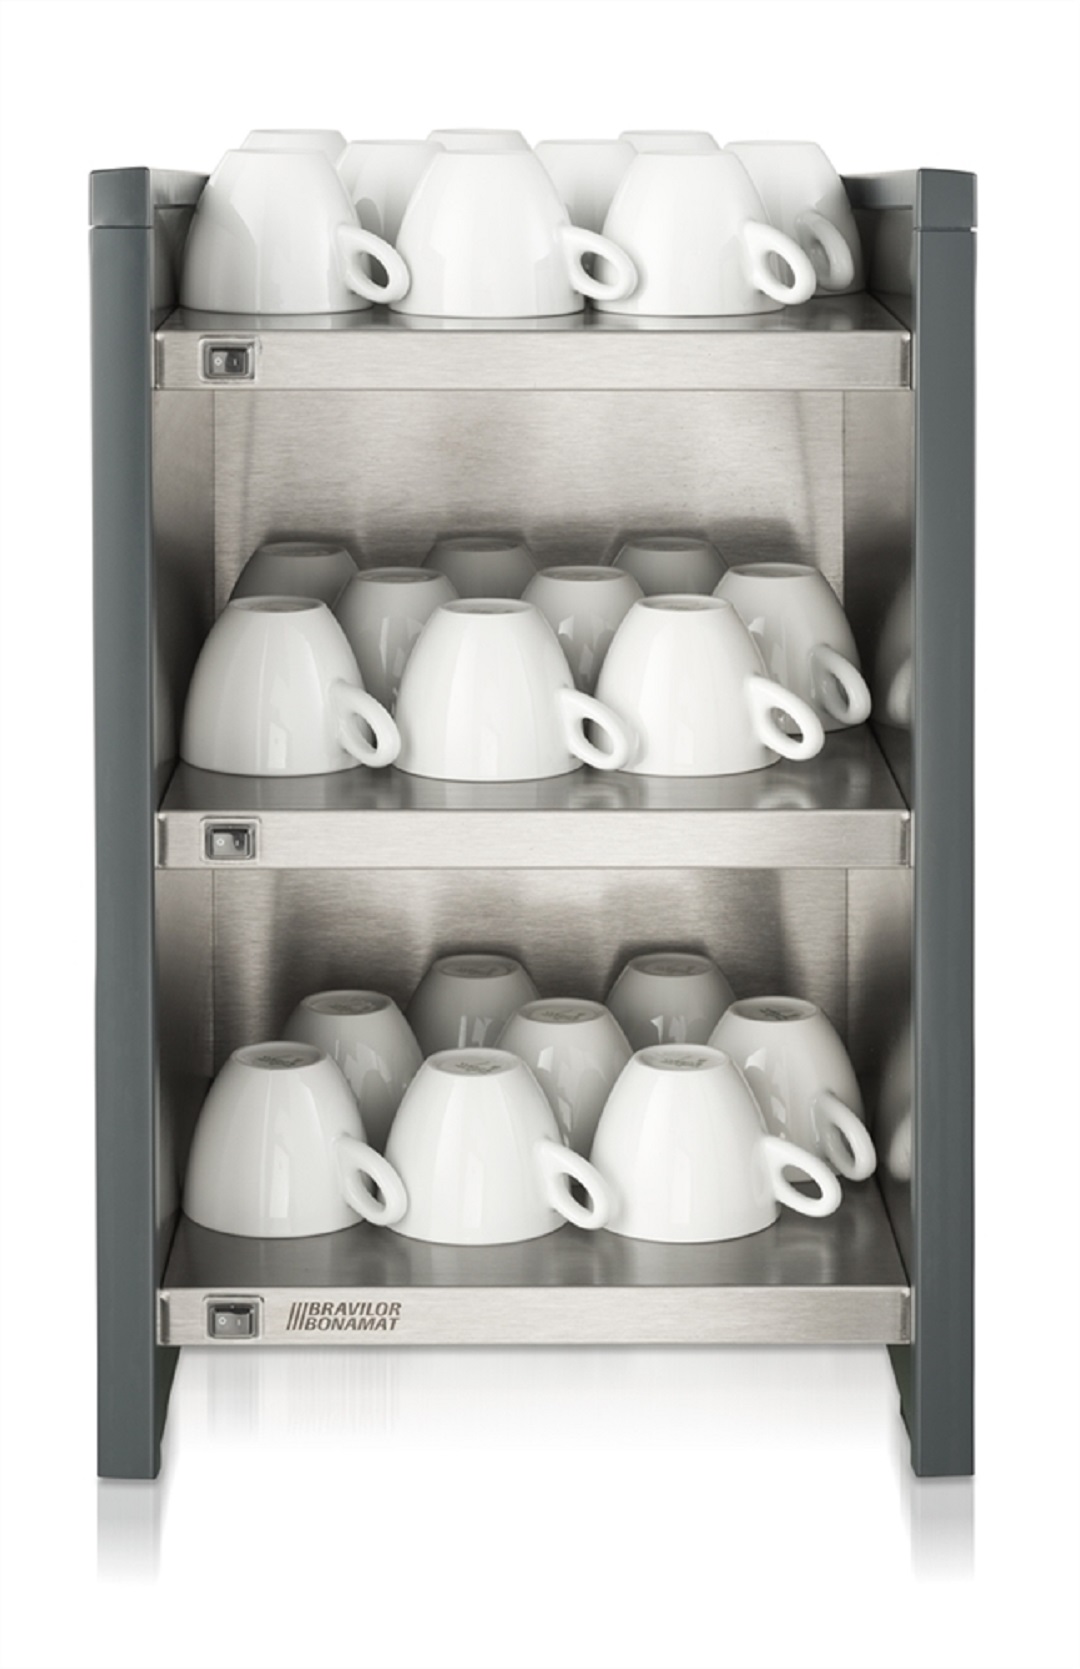 Bravilor WHK Heated Cup Storage Cabinet (8.040.041.82002)